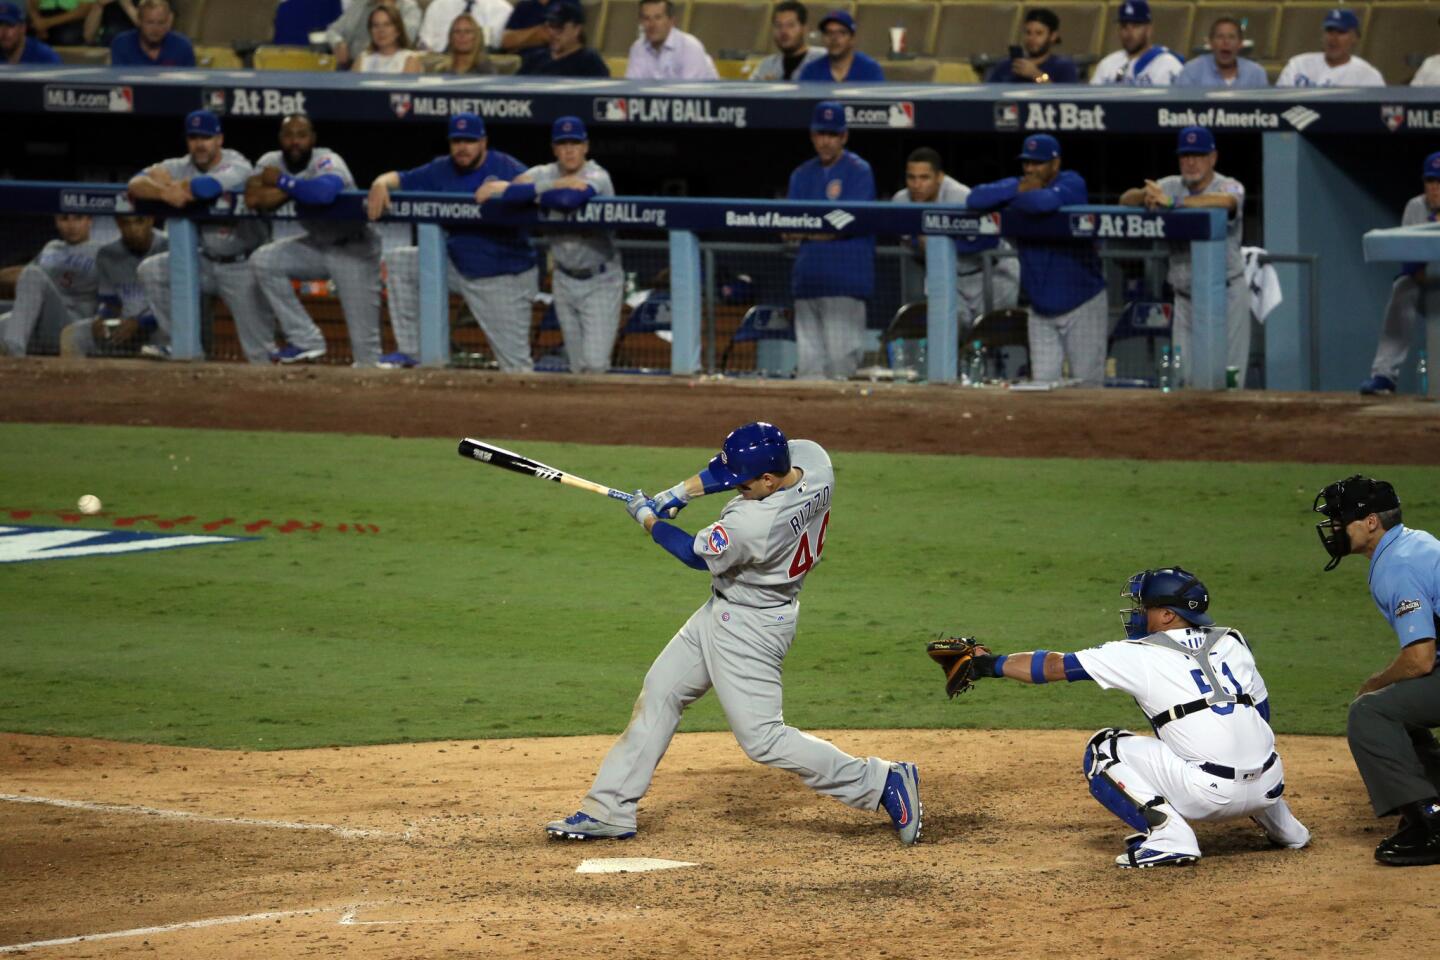 NLCS Game 4: Cubs 10, Dodgers 2